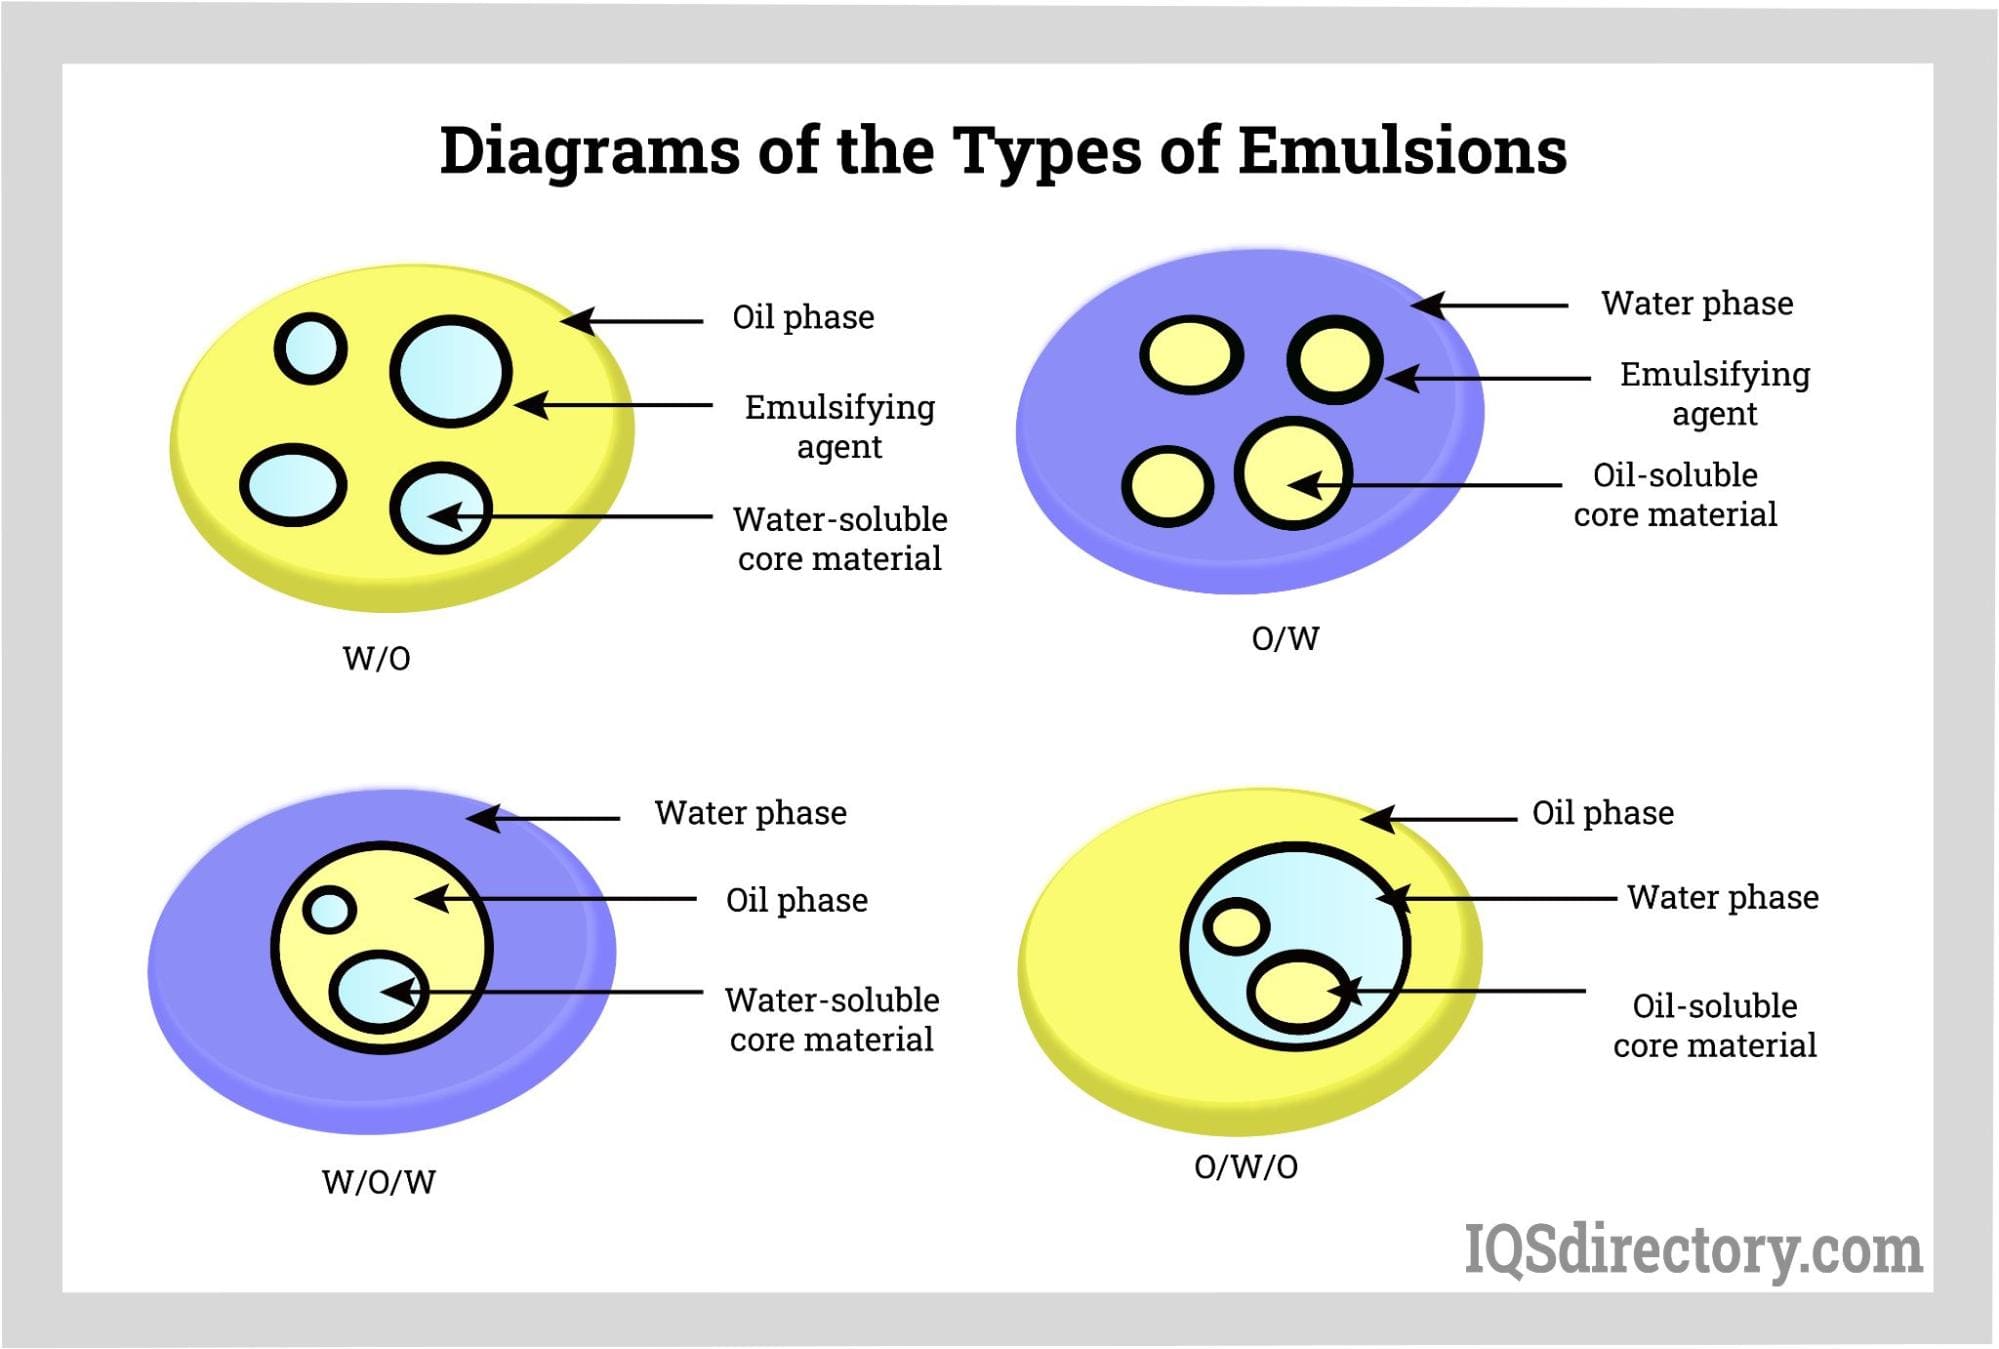 Diagrams of the Types of Emulsions